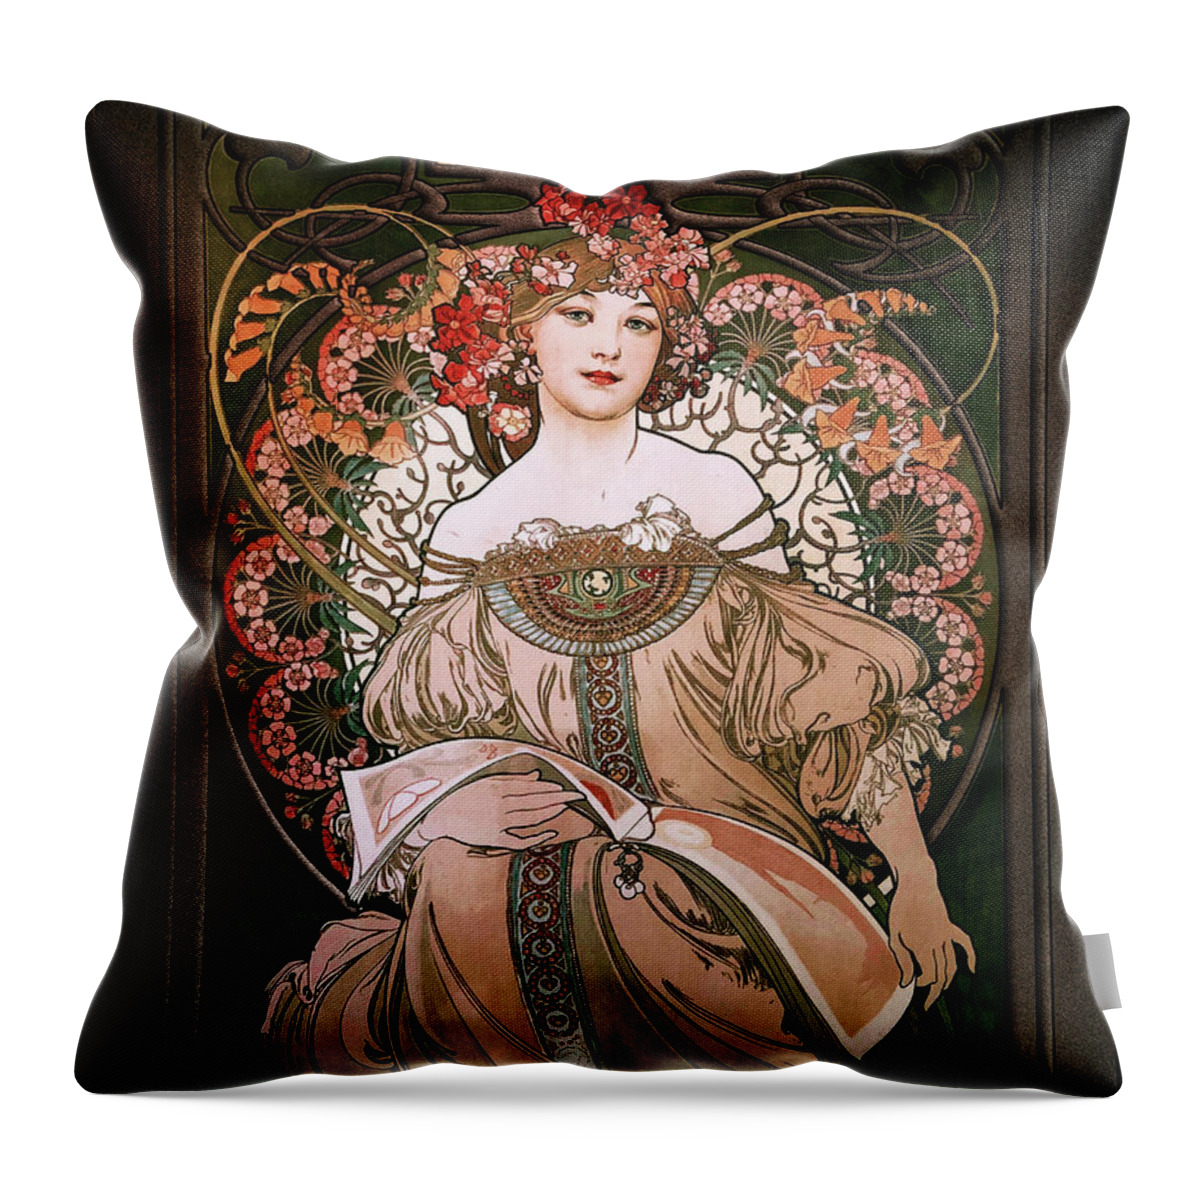 Daydream Throw Pillow featuring the painting Daydream by Alphonse Mucha Black Background by Rolando Burbon